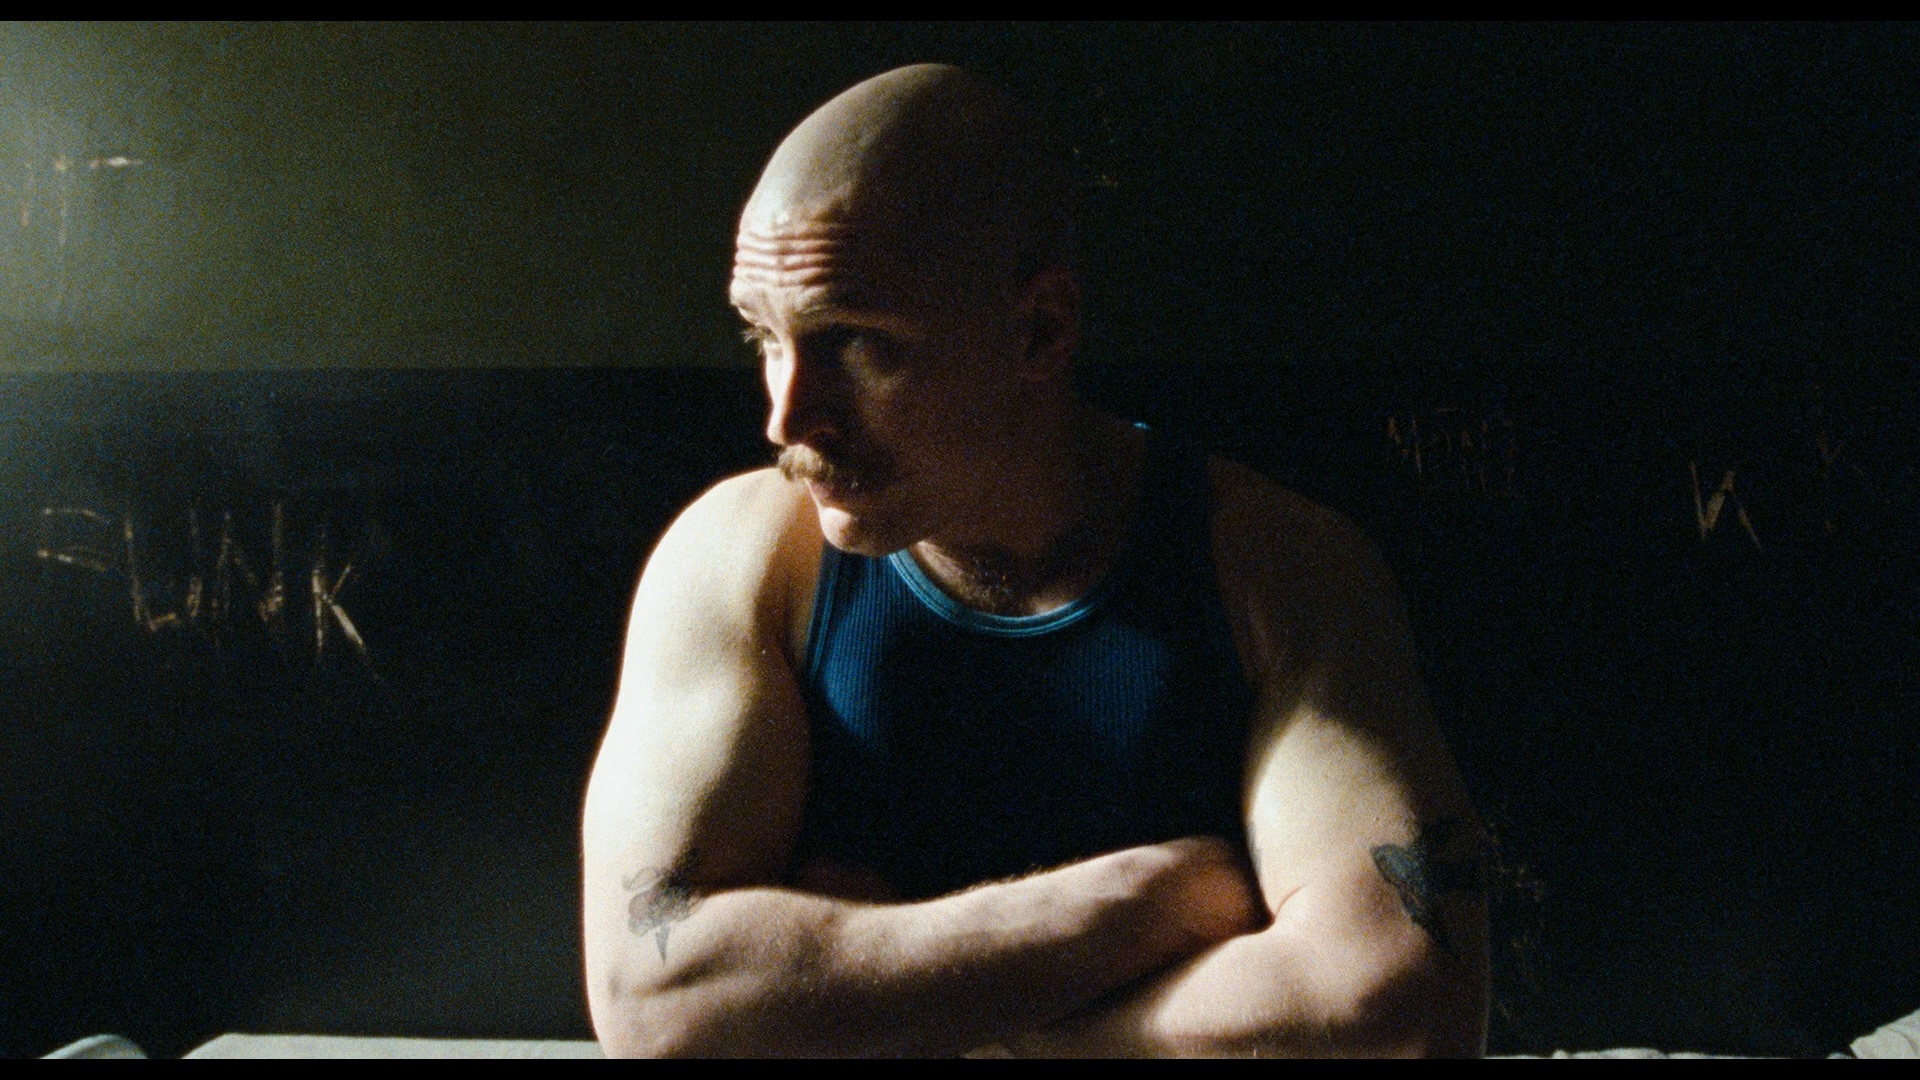 9/9 Magnolia provides Bronson one of the most intriguing sound mixes on Blu...